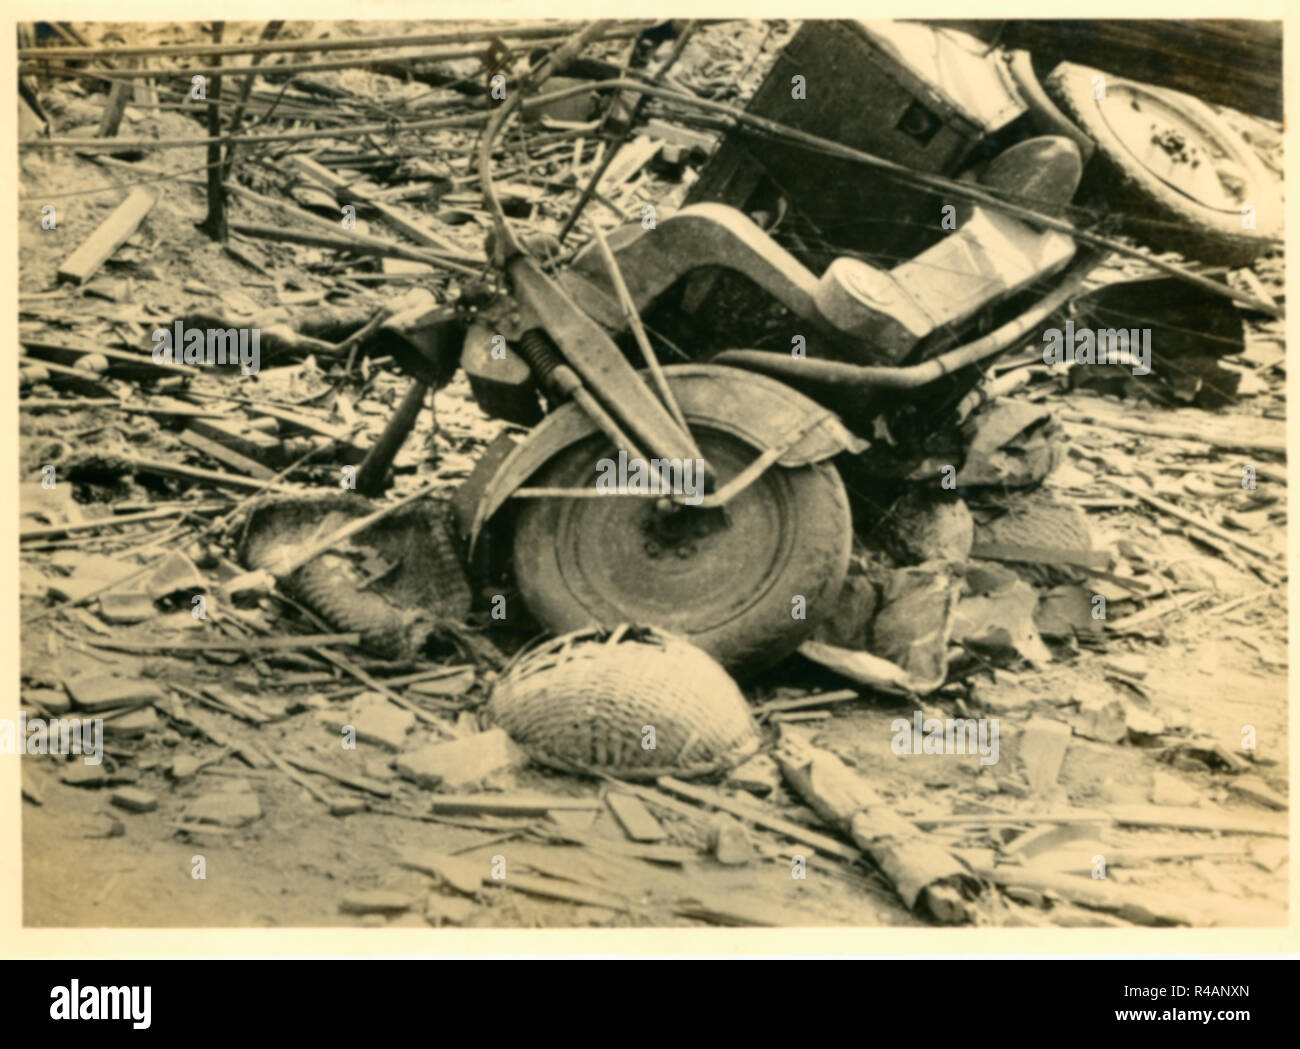 Destroyed trike 3 wheel vehicle and corpse dead body,  victims of atomic bombing in devastated ruins wasteland, Hiroshima, Japan, 1945 Stock Photo